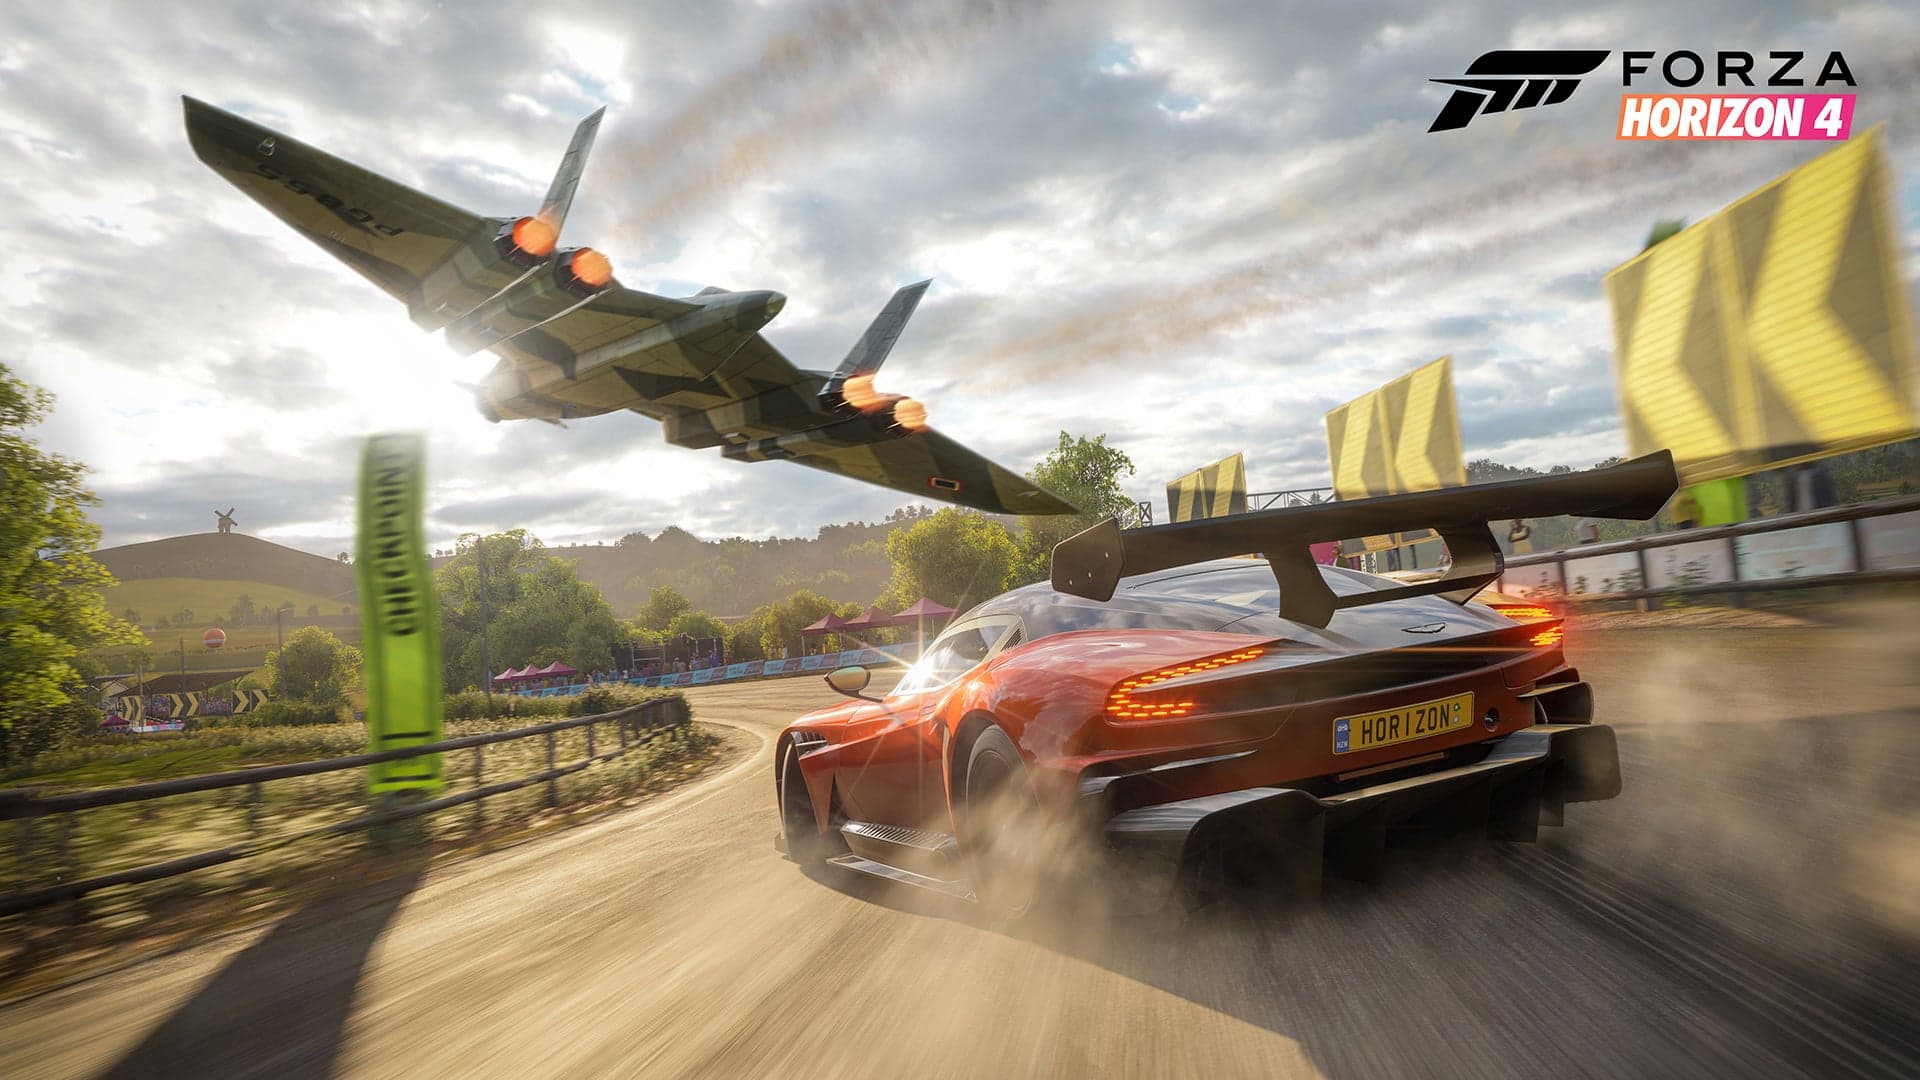 Forza Horizon 4 Xbox One Preview: We Play the First Hour of the Craziest Version Yet